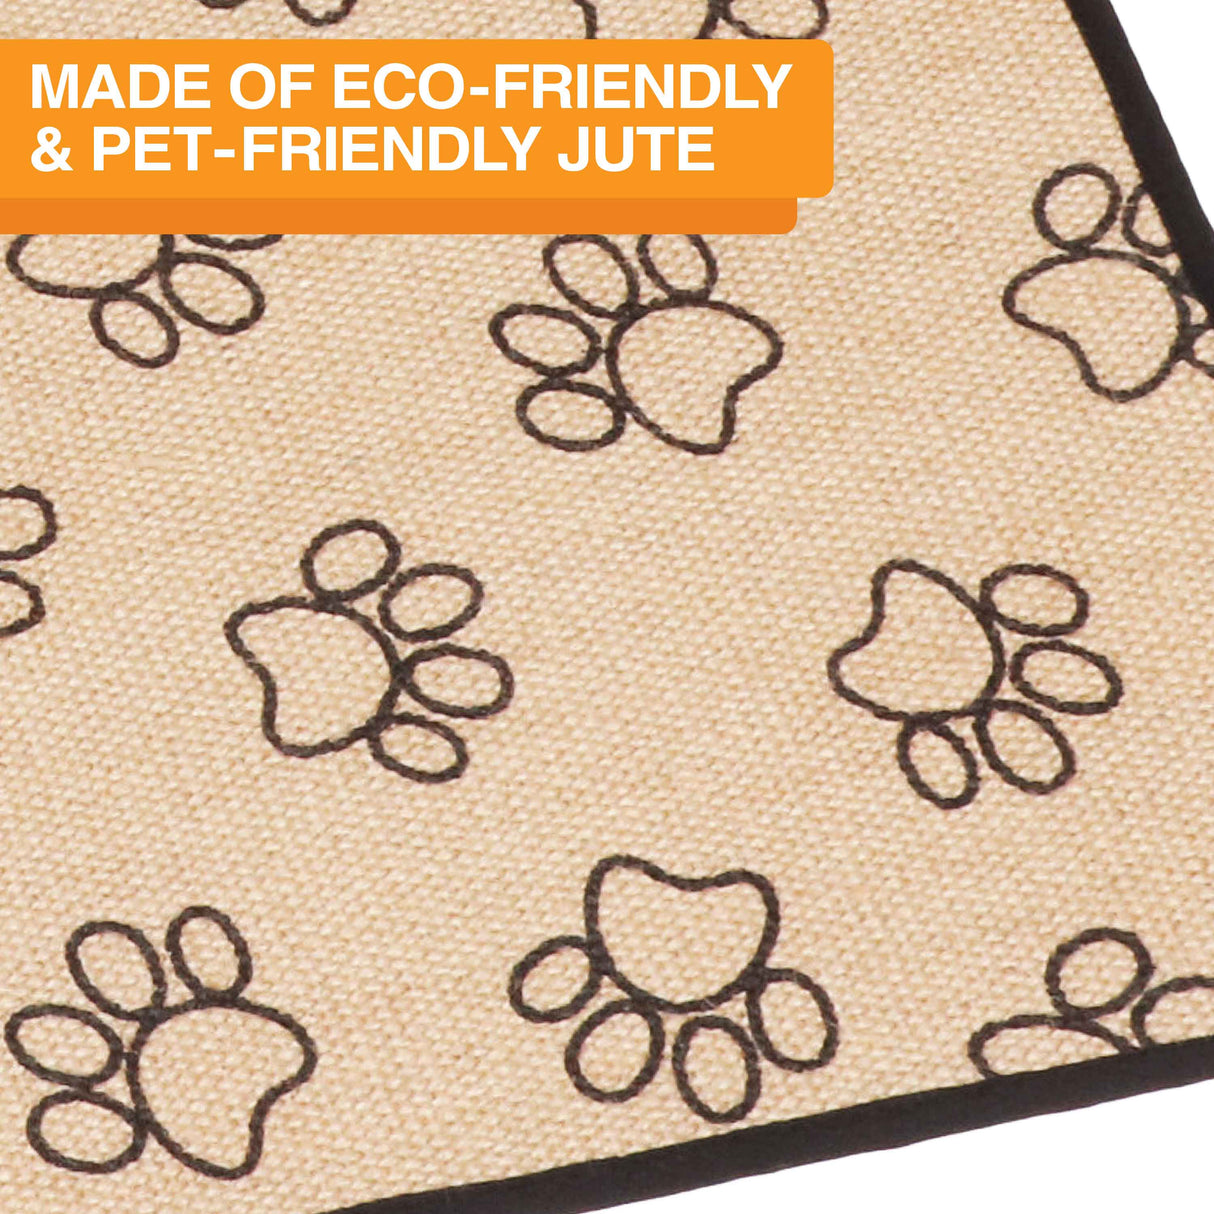 Paw print mat made of eco-friendly jute